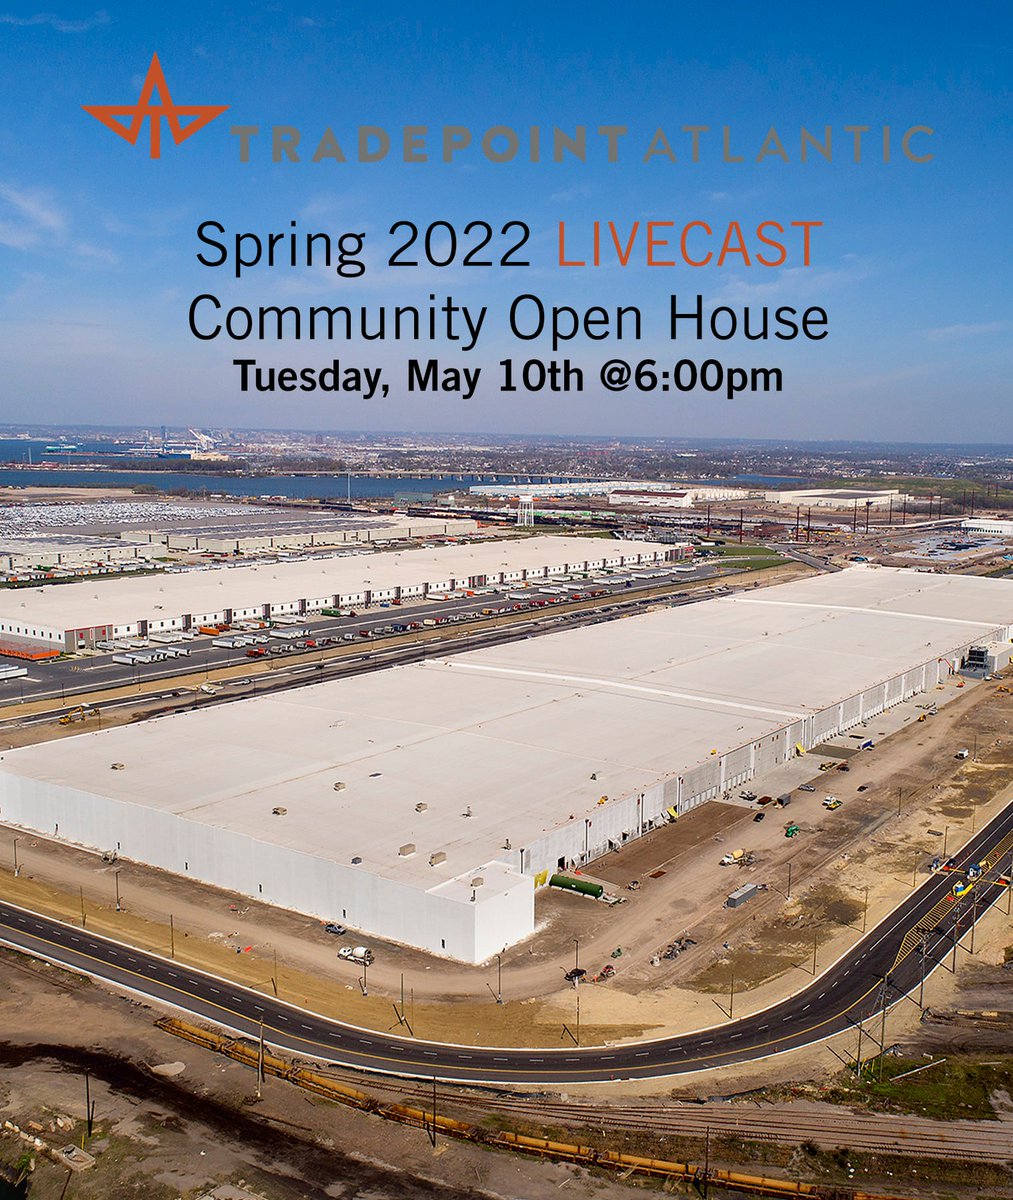 Announcing our Spring 2022 Open House Live Cast Event.  Get the latest updates from the TPA team. Stay tuned for more details! #industryinmotion #springopenhouse